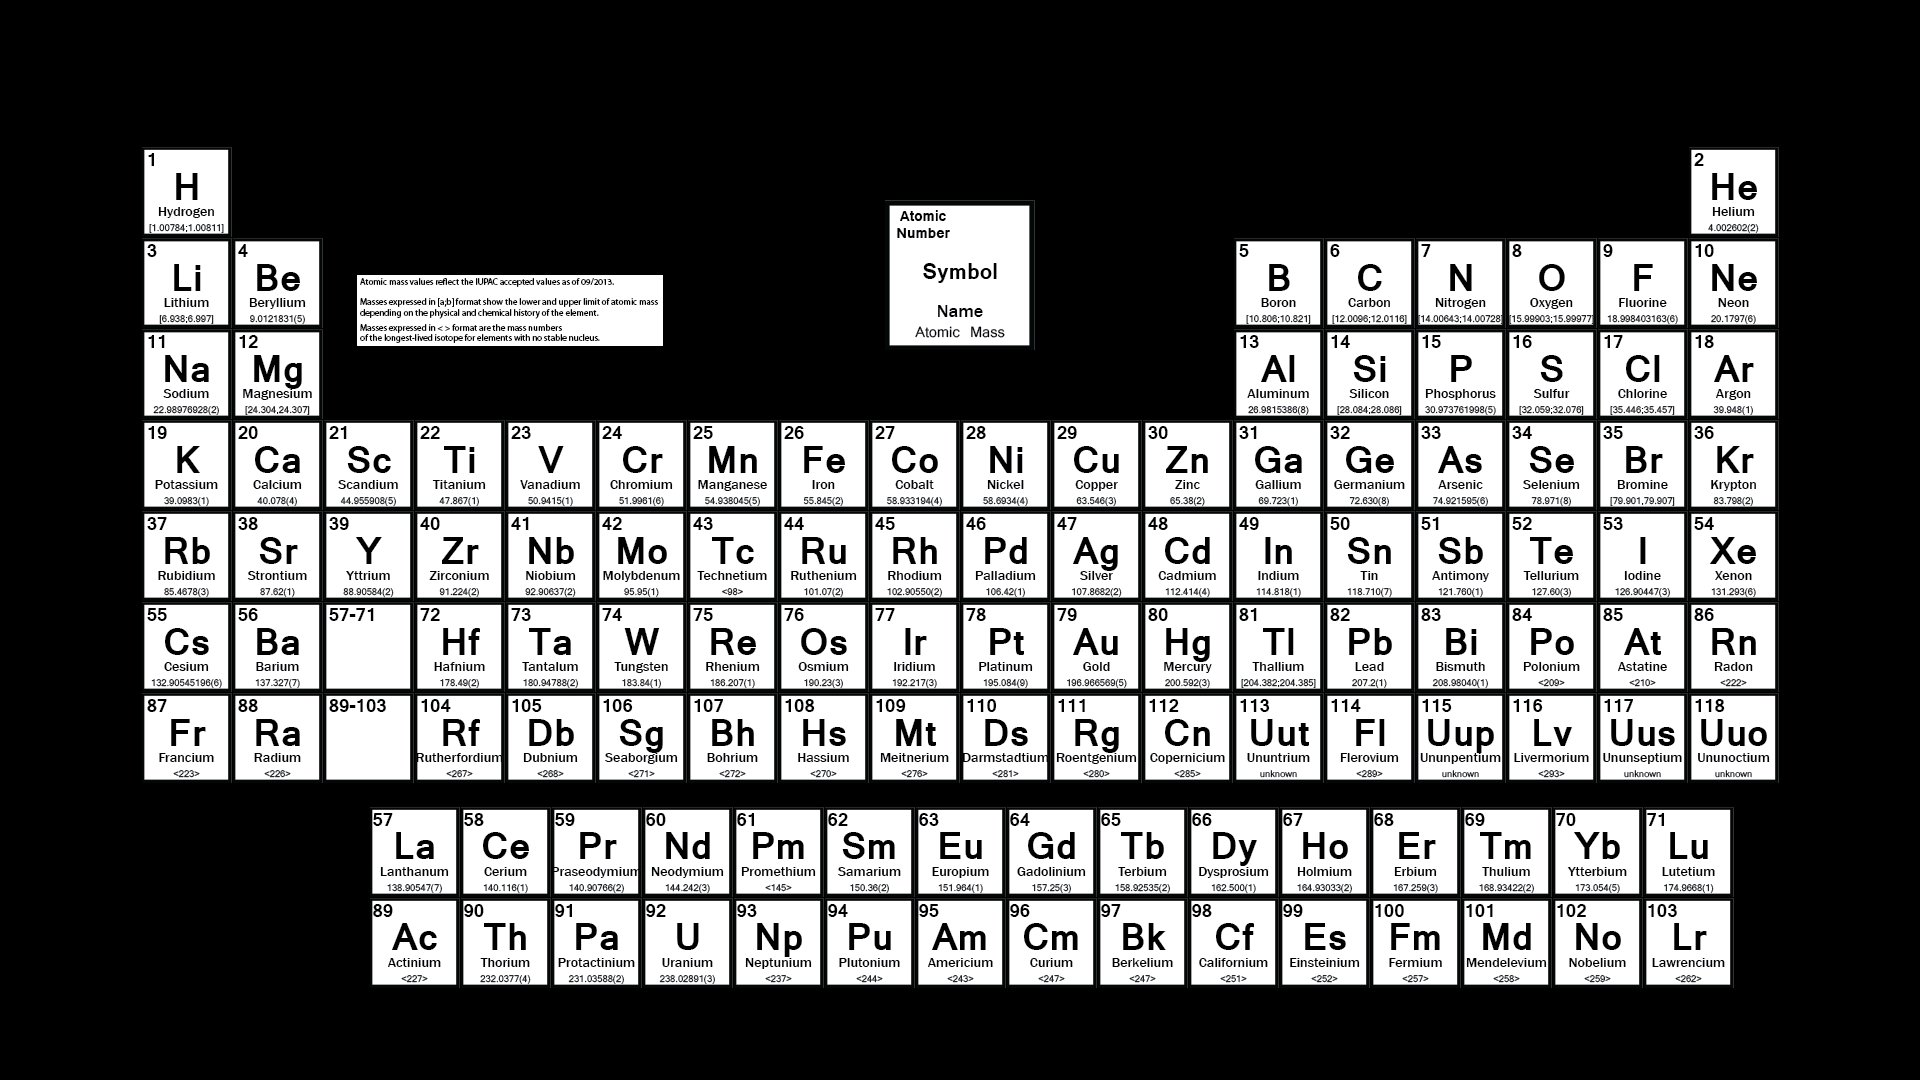 chemical elements with a